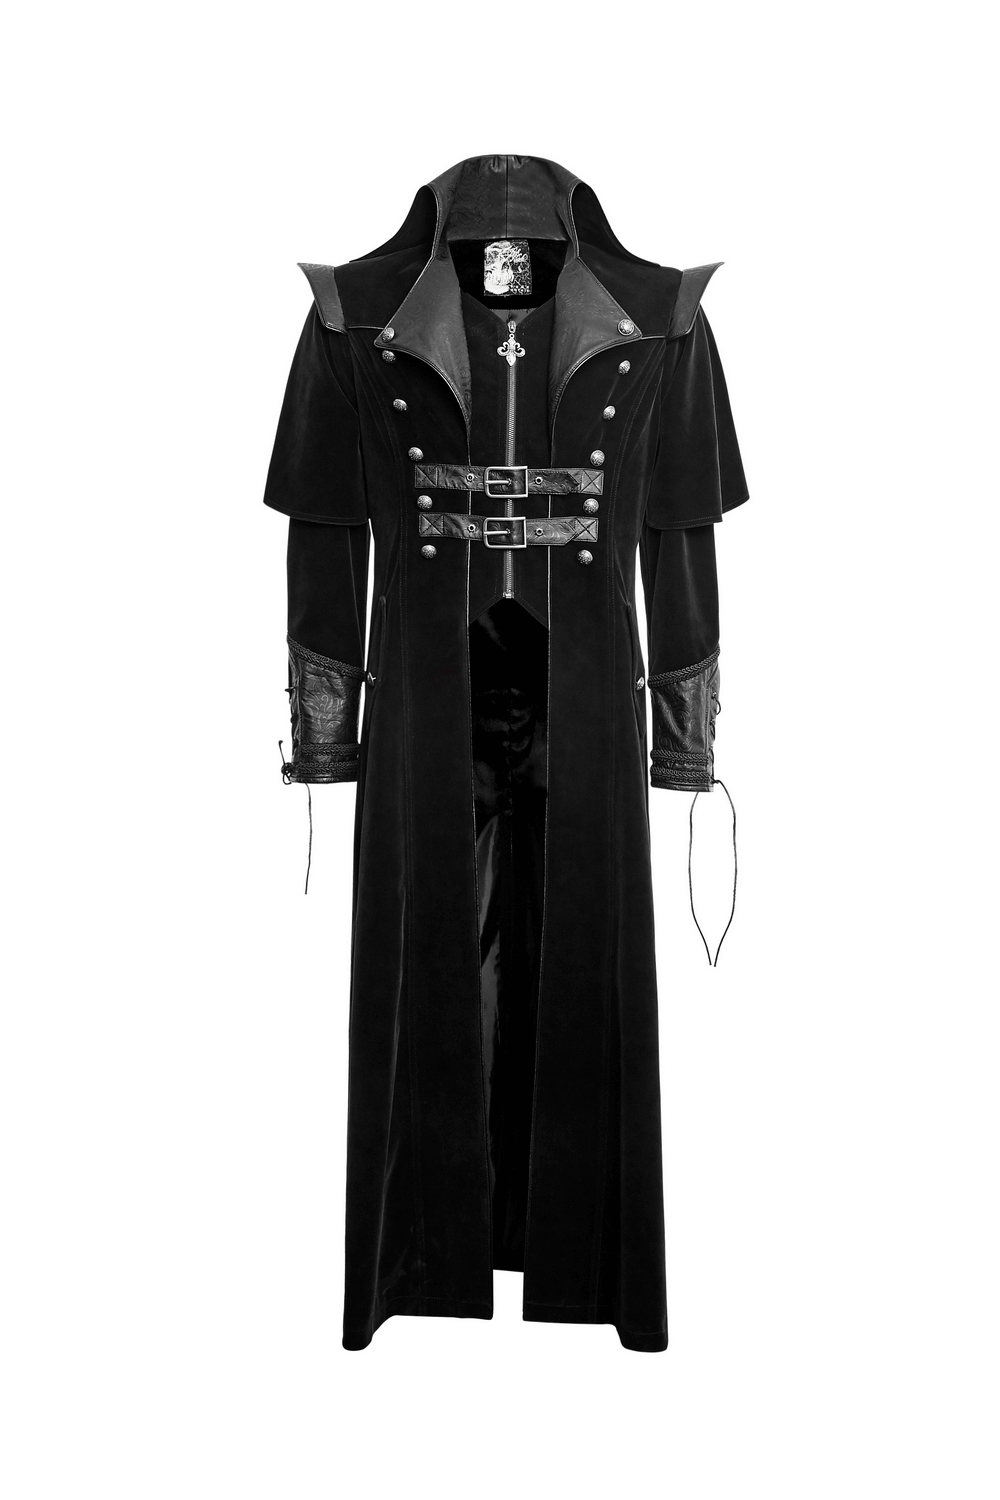 Vintage Gothic Male Velvet Cloak with Leather Accents - HARD'N'HEAVY